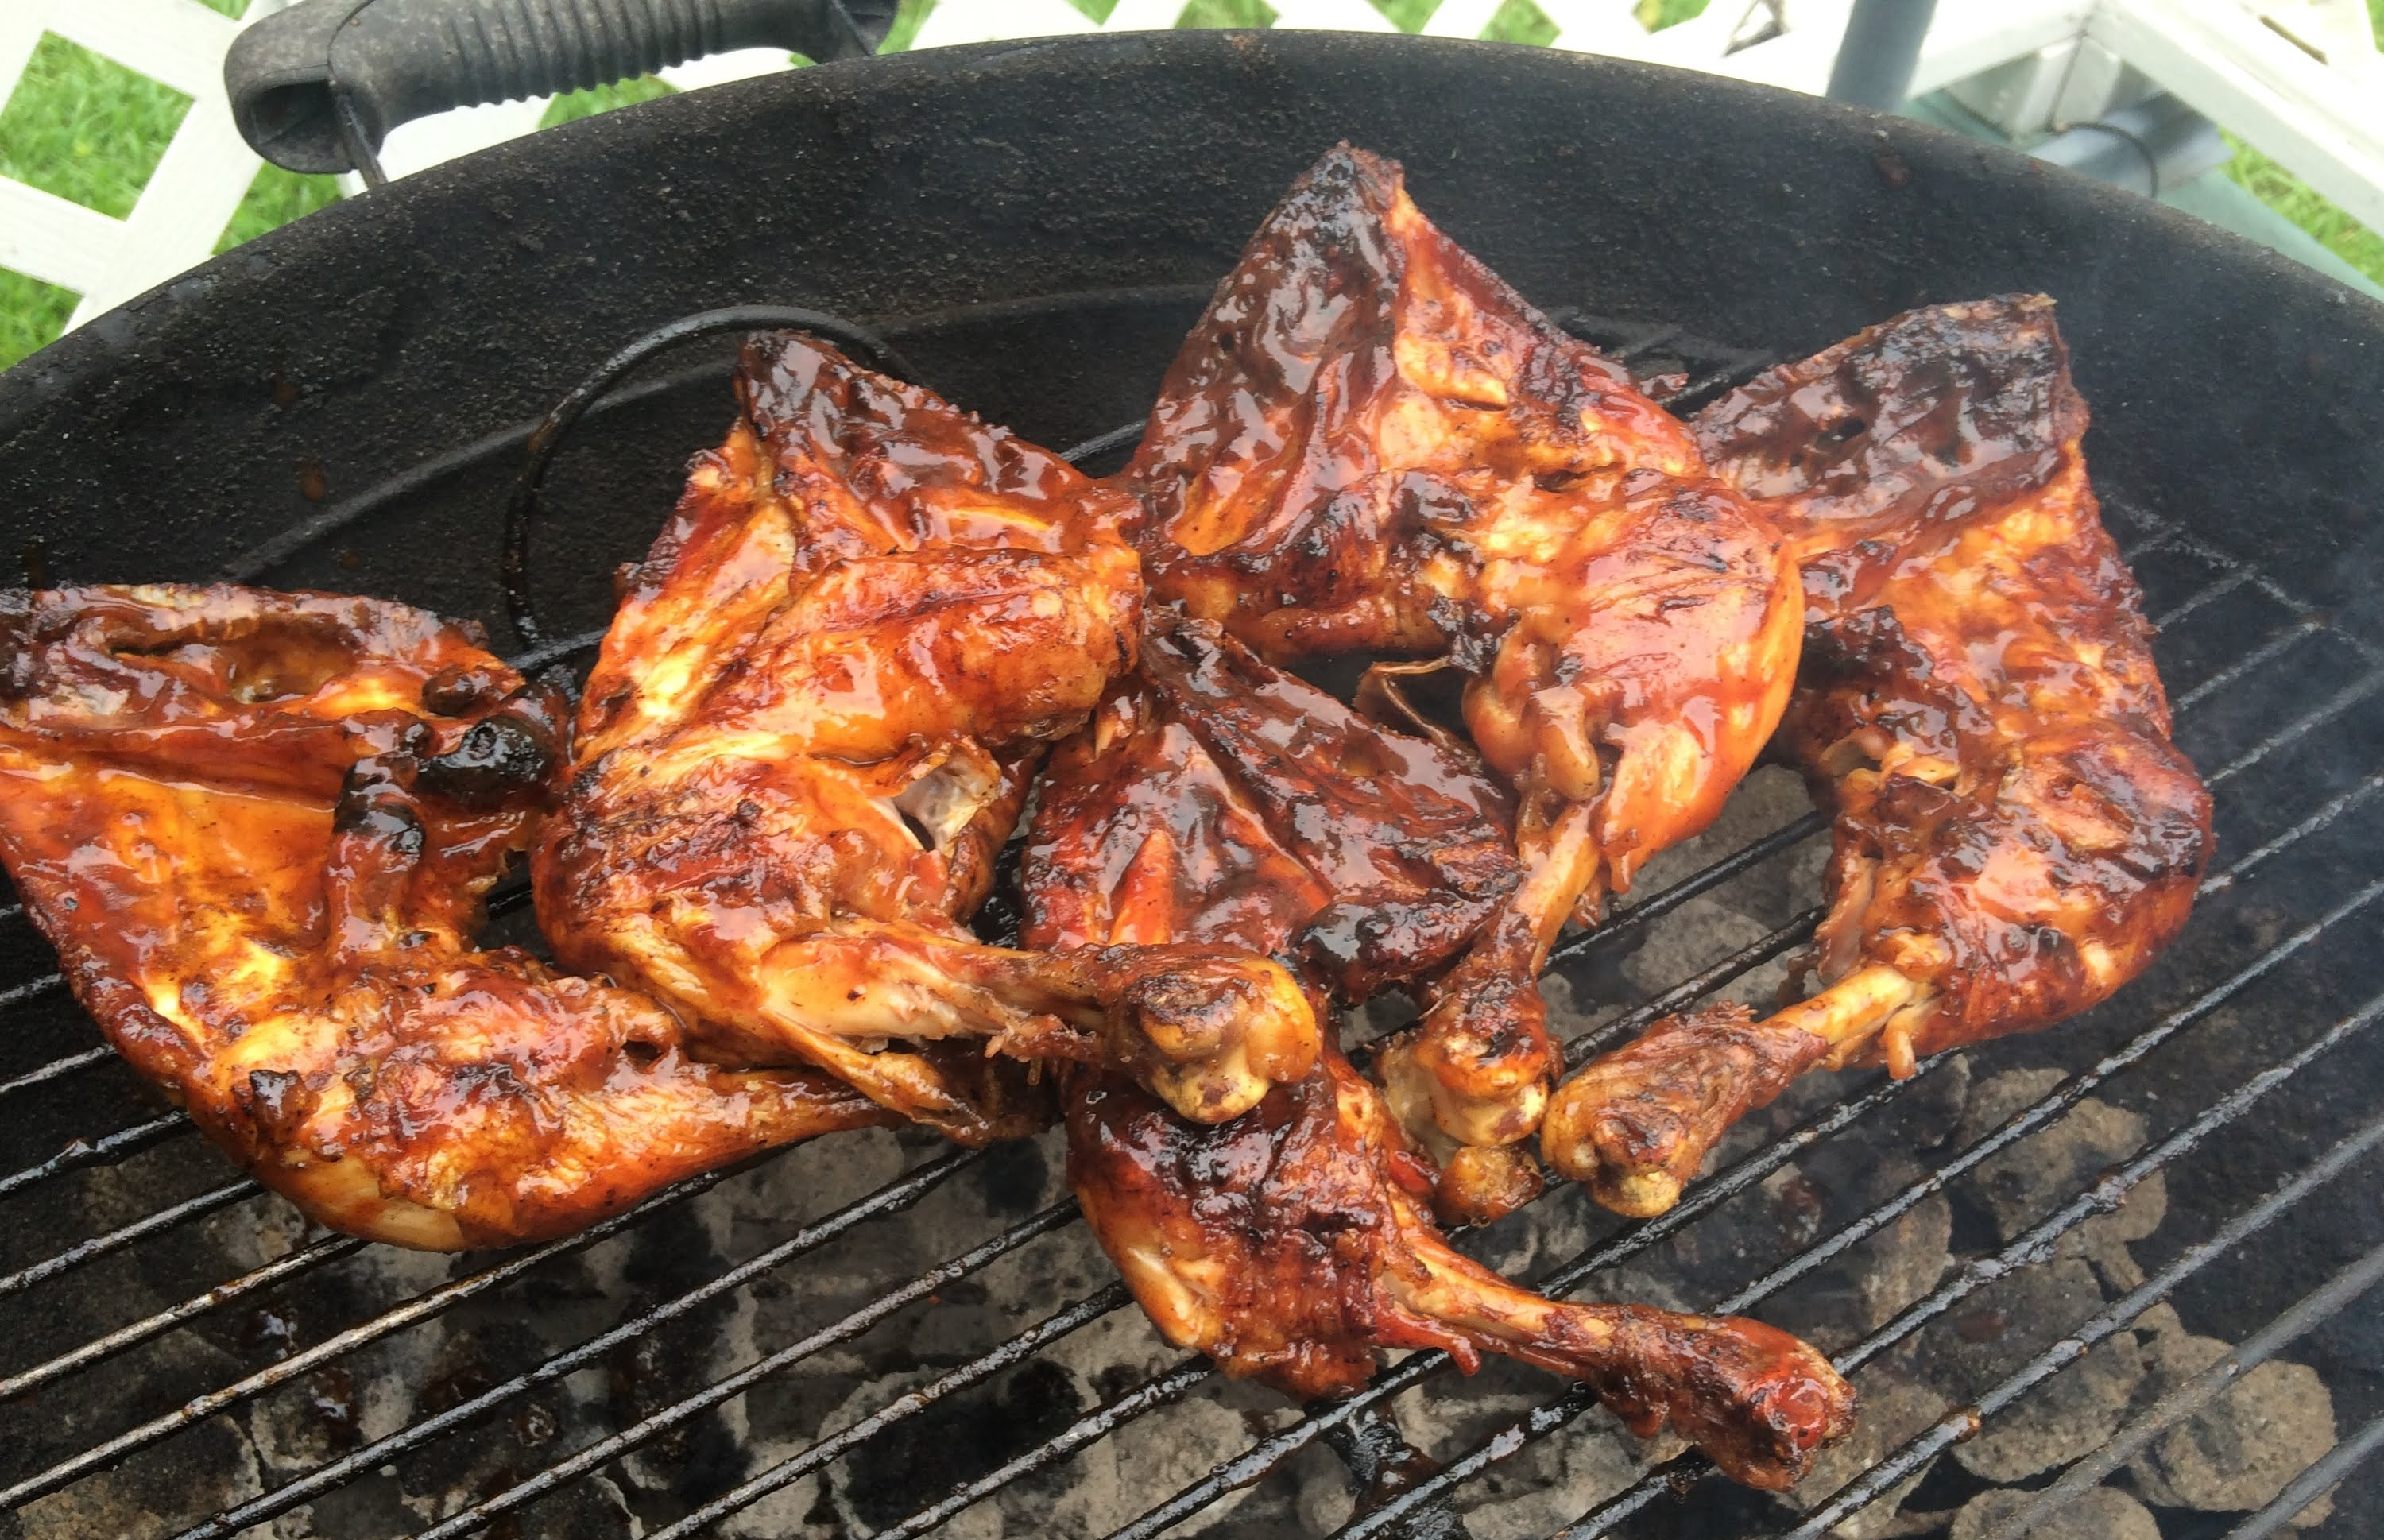 Grilling Chicken Thighs On Gas Grill
 Grilled Leg Quarters – Oasis amor Fashion